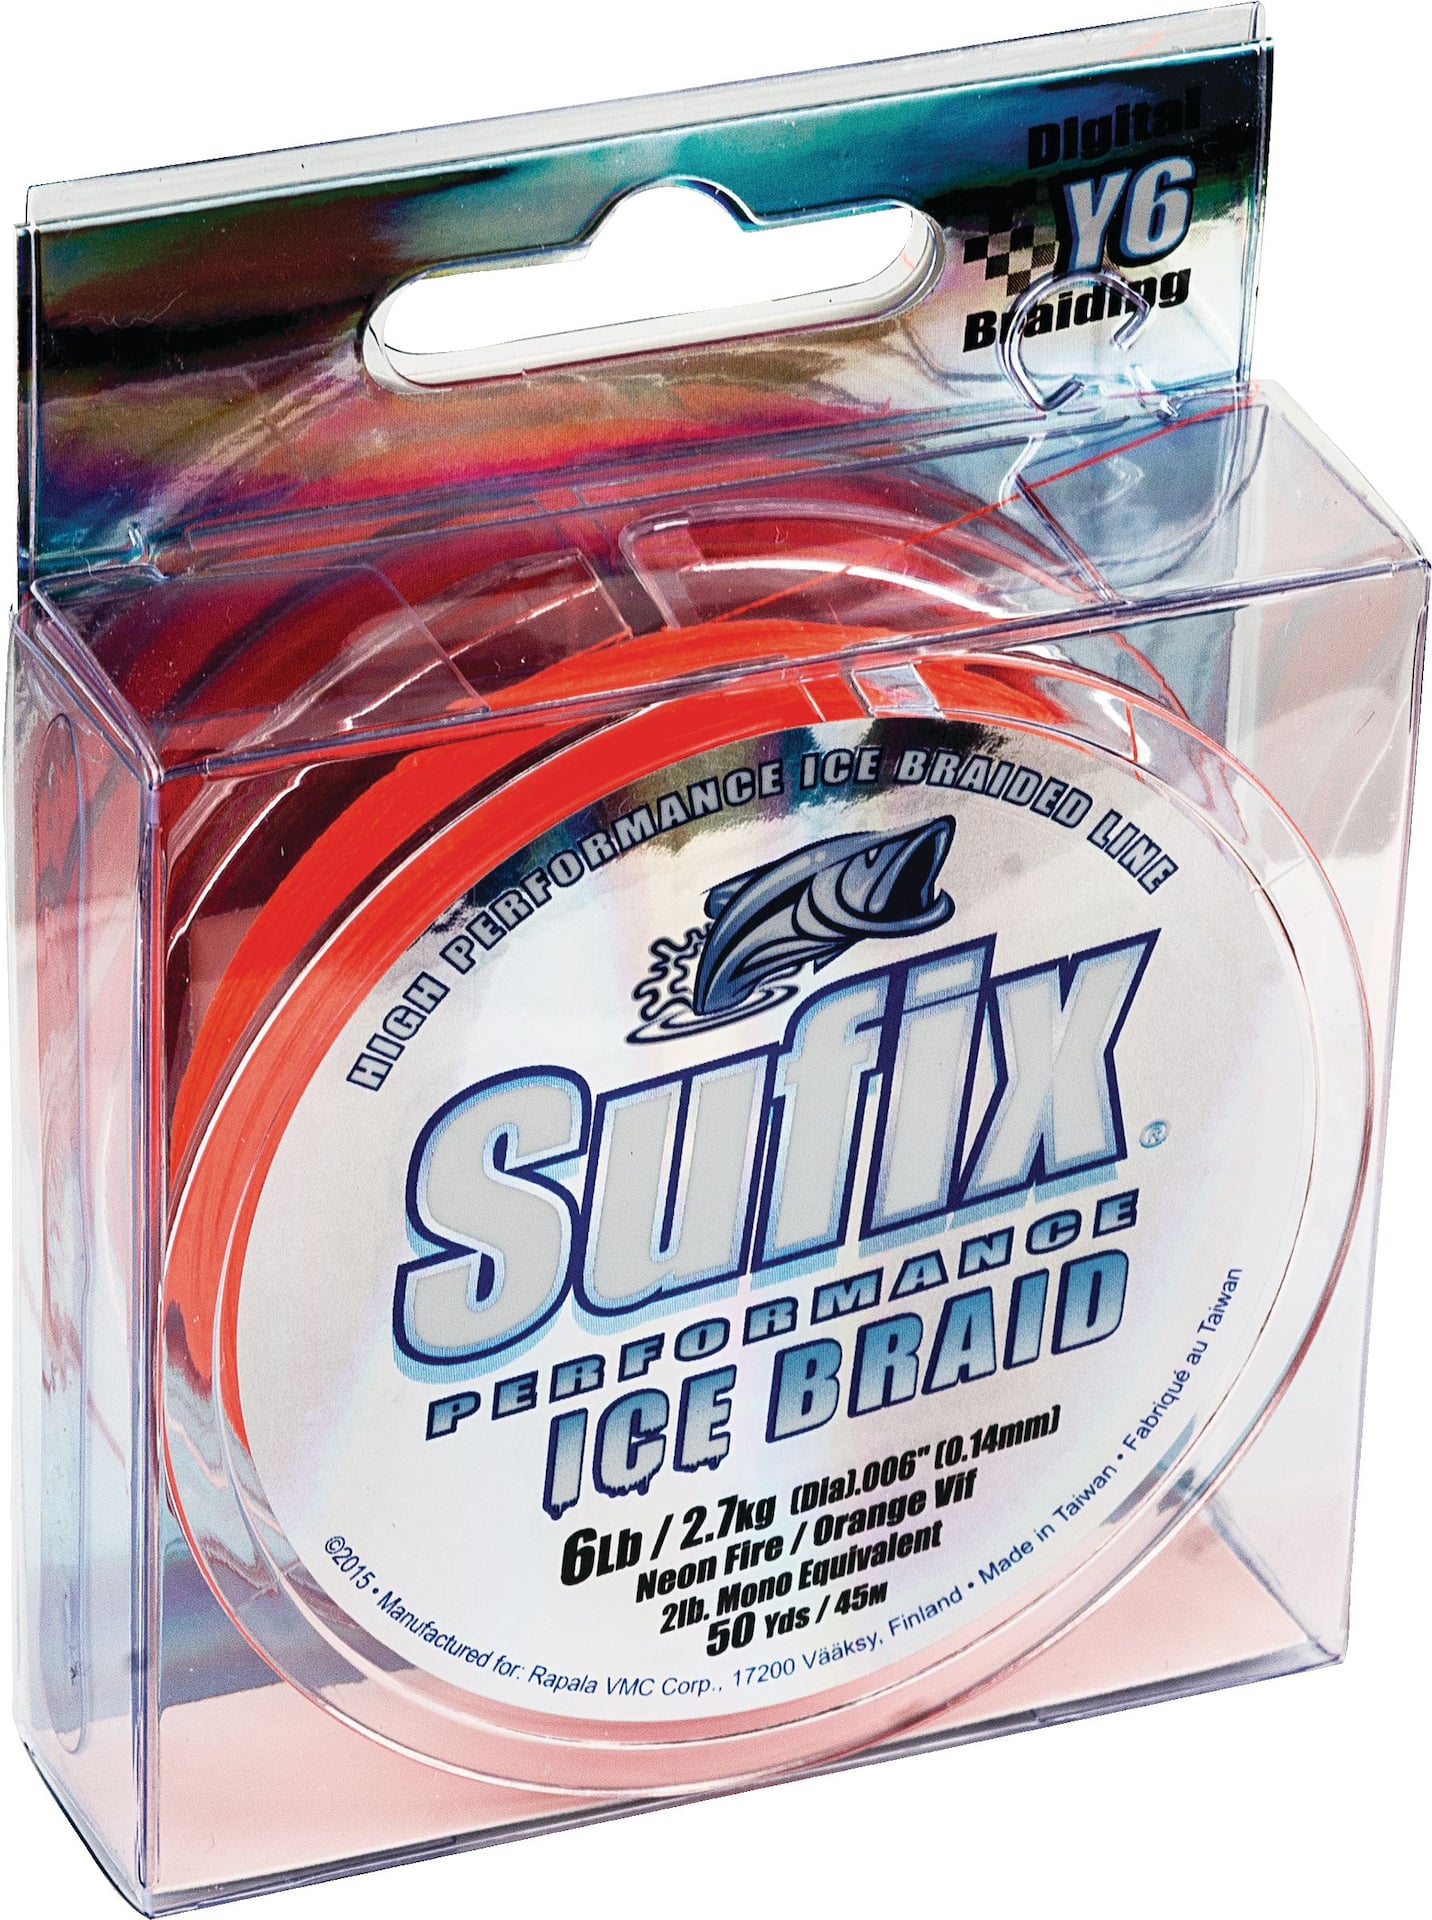 3 Things You Must Know Before Selecting Braided Fishing Line